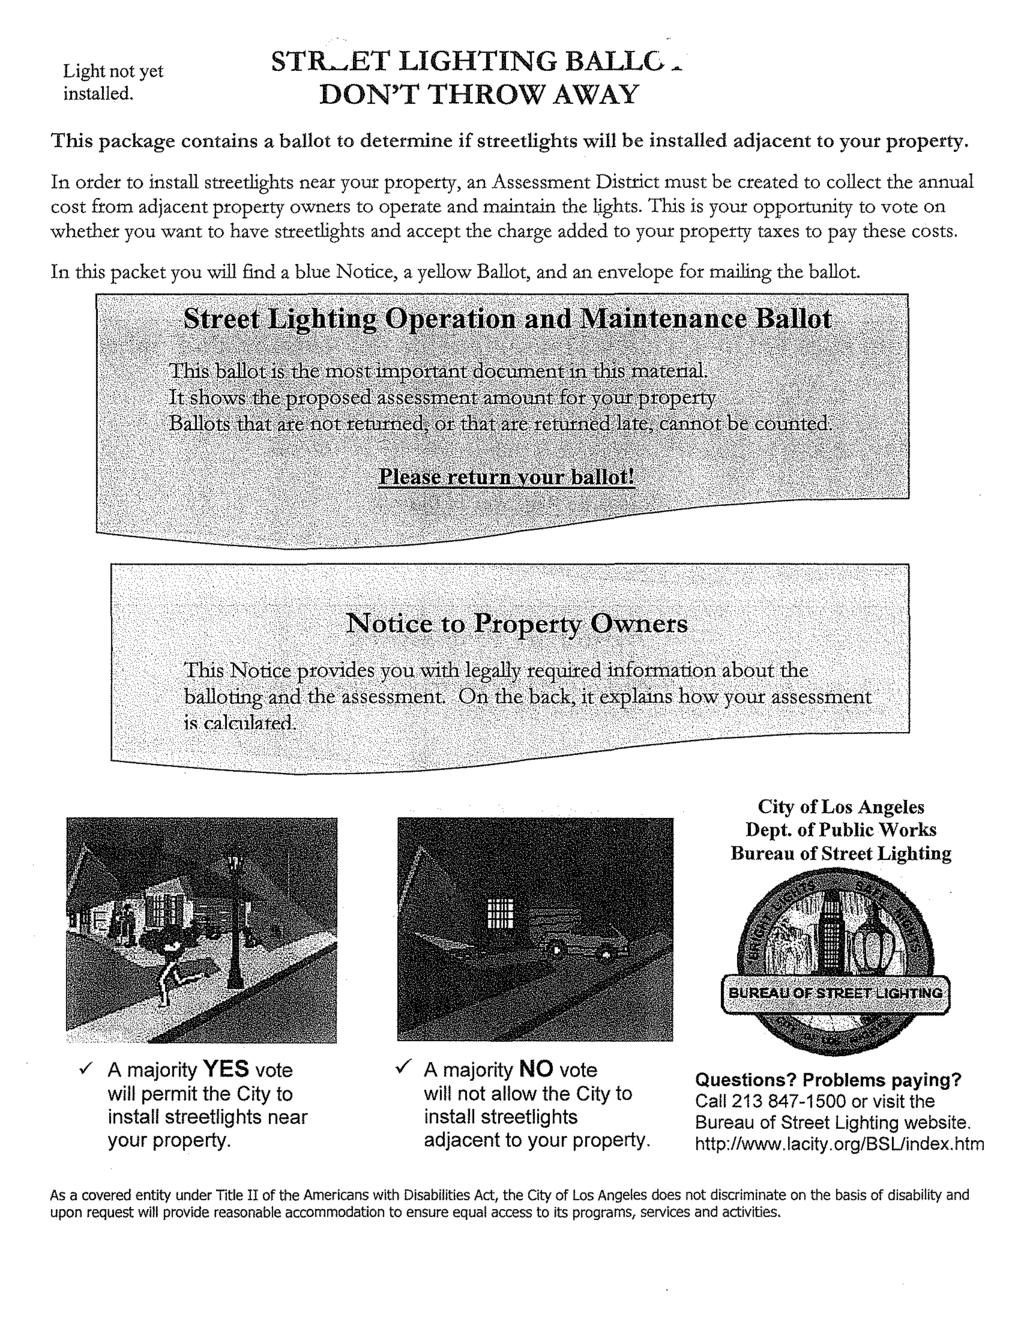 Light not yet installed. STLET LIGHTING BALLG~ DON'T THROWAWAY This package contains a ballot to determine if streetlights will be installed adjacent to your property.